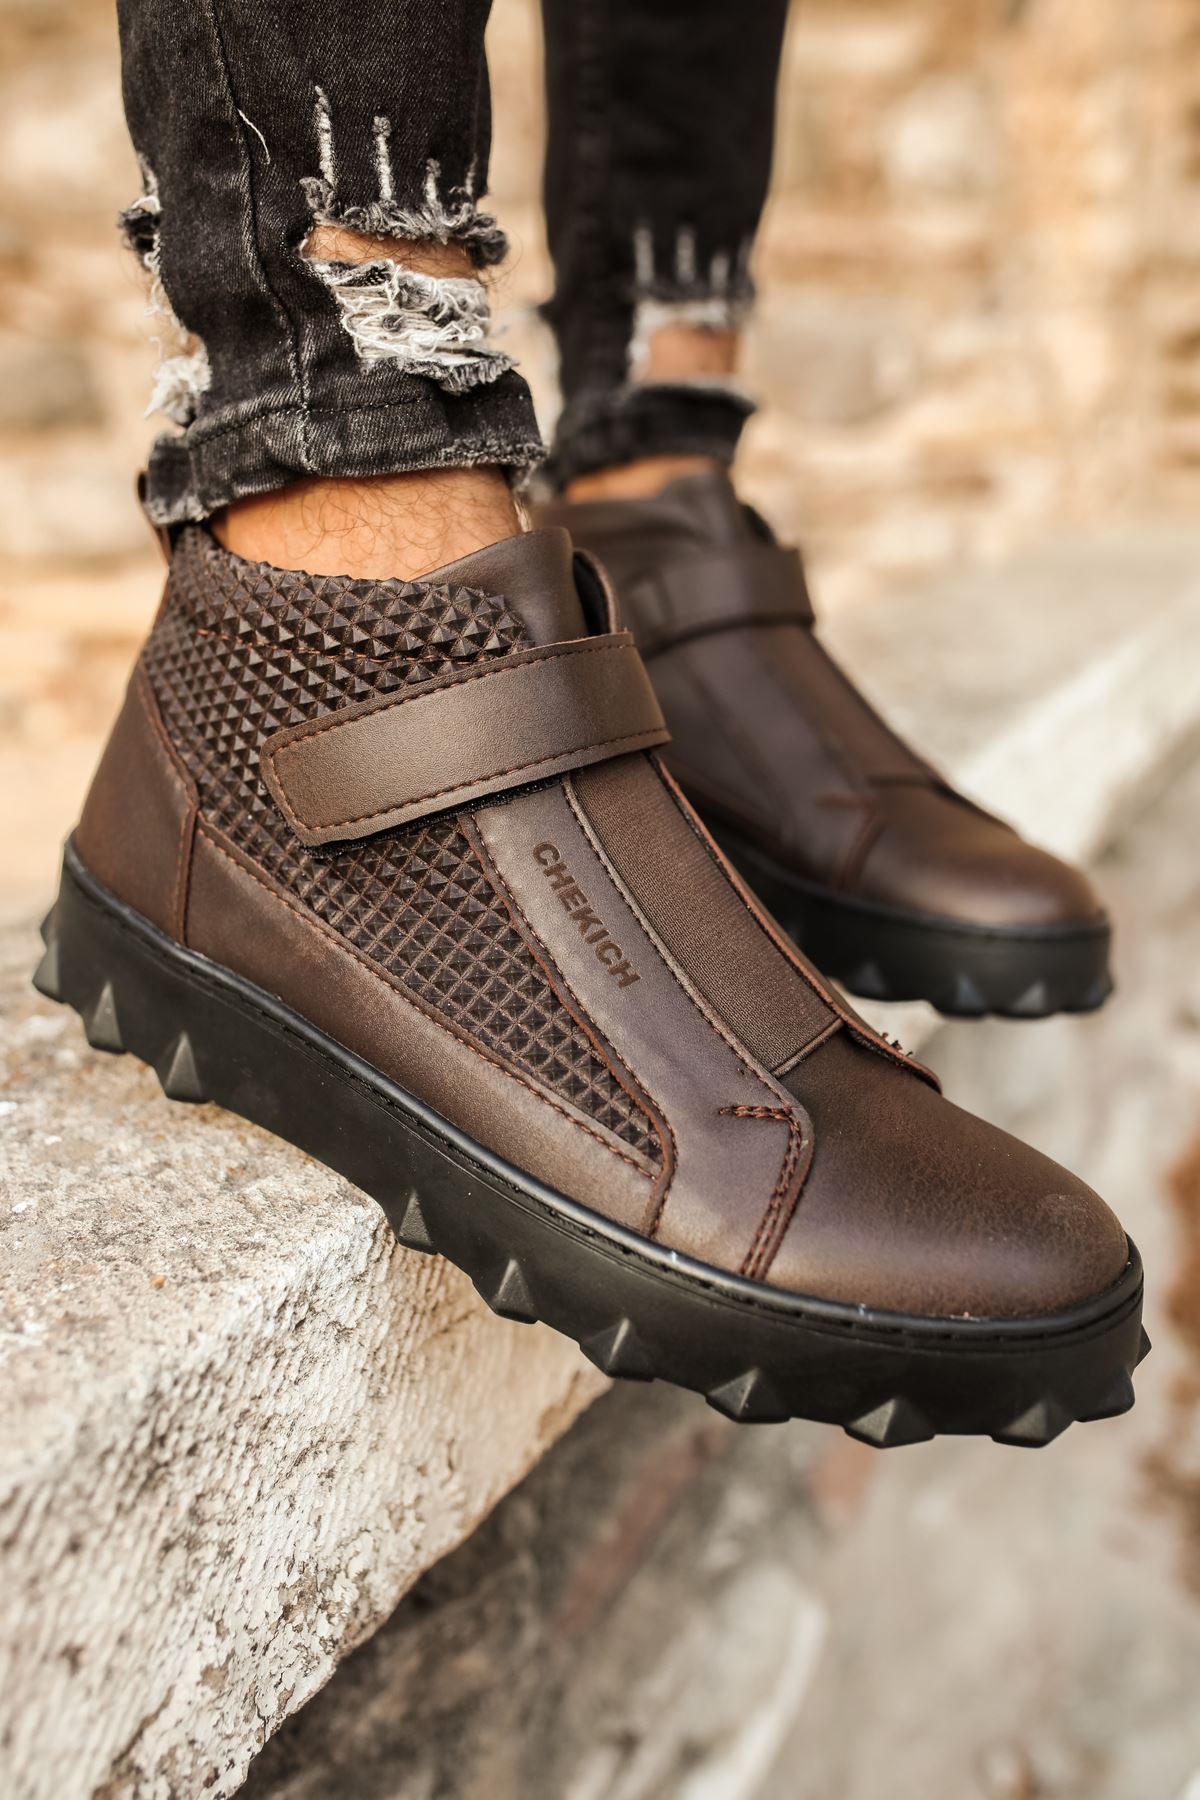 CH103 ST Men's Sneaker Boots BROWN - STREETMODE ™